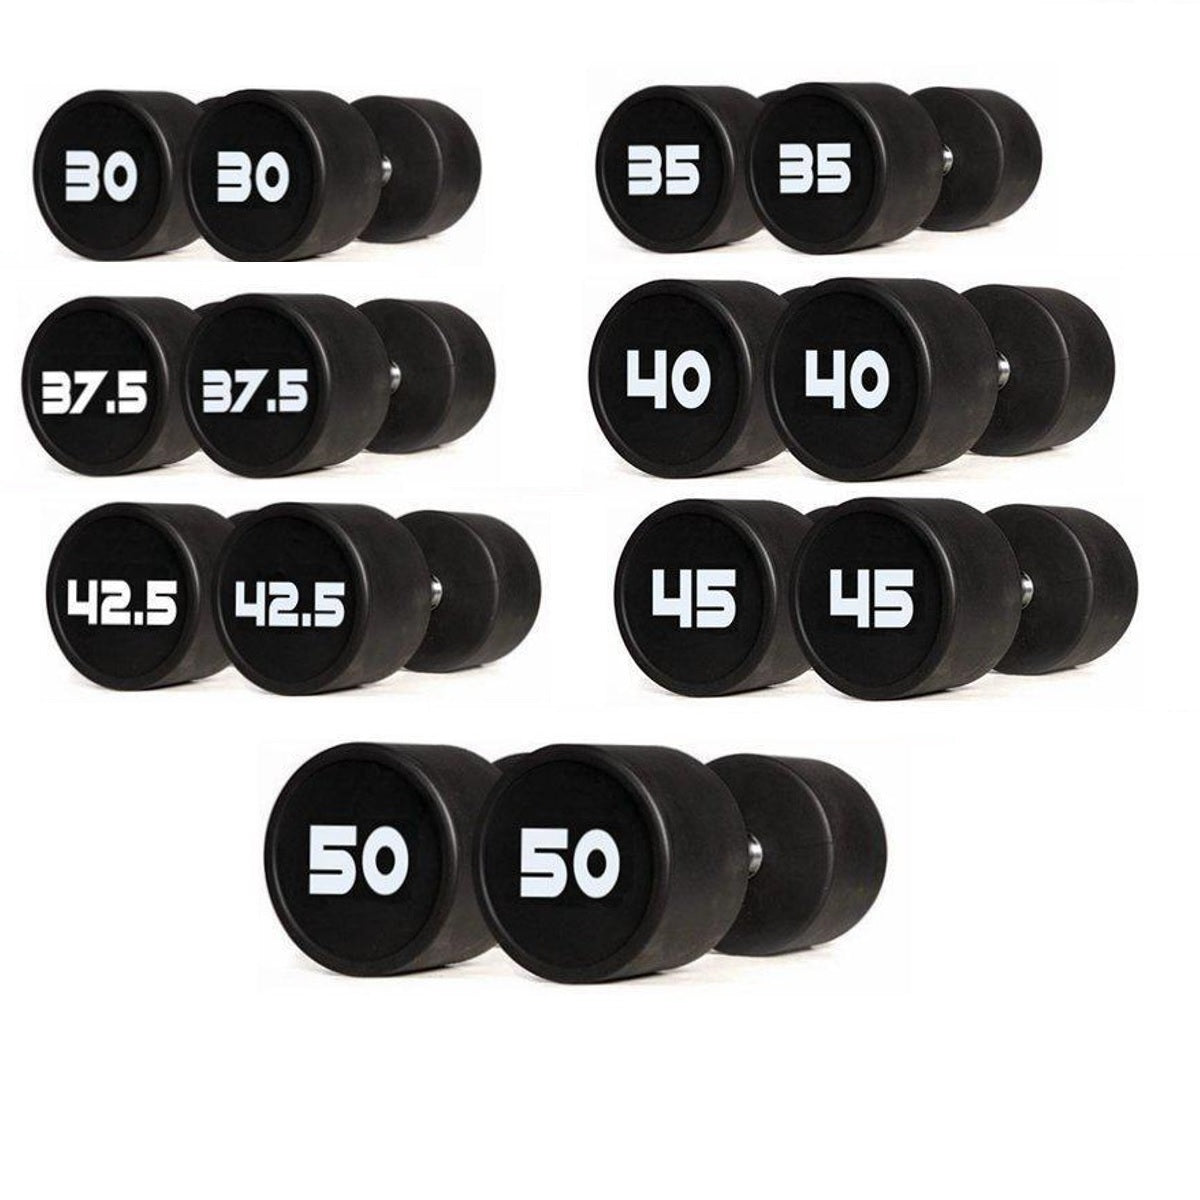 -Prostyle PU Dumbbell Package-Gym Direct